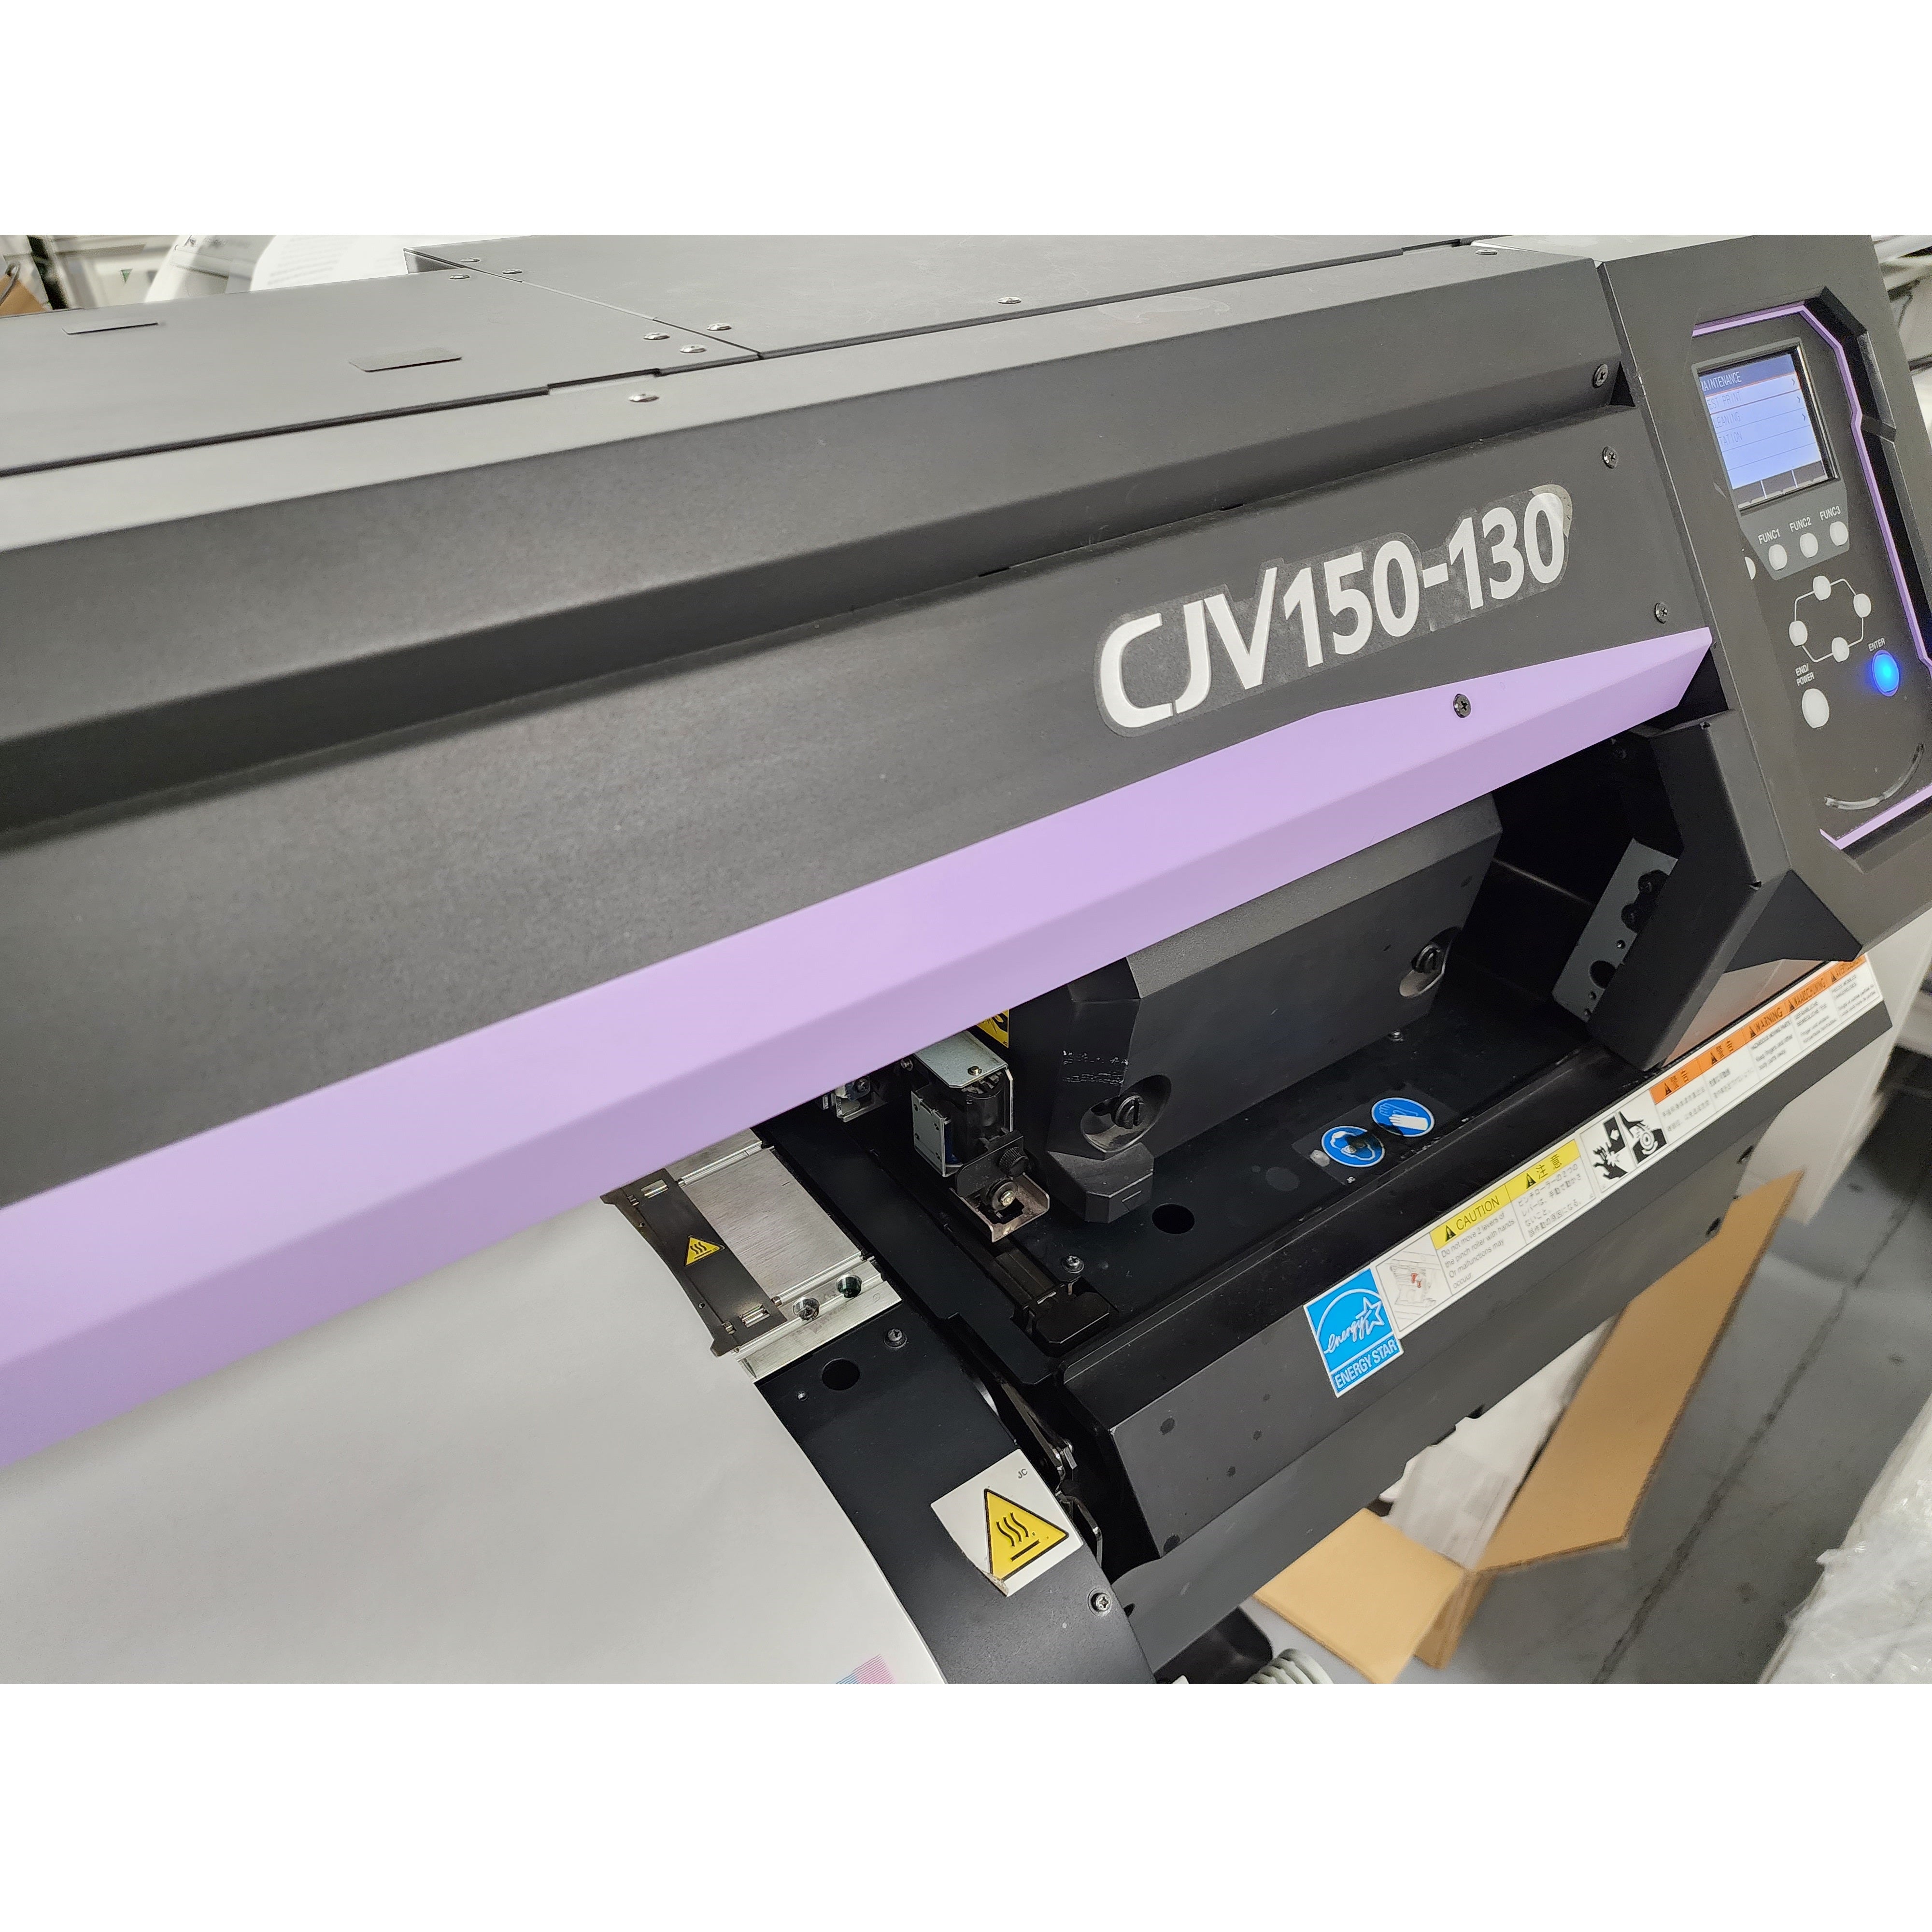 $225/Month Mimaki CJV150-130 Current Model 9Print/Cut) Printer/Cutter 54" Inches Plotter With Auto Soaking